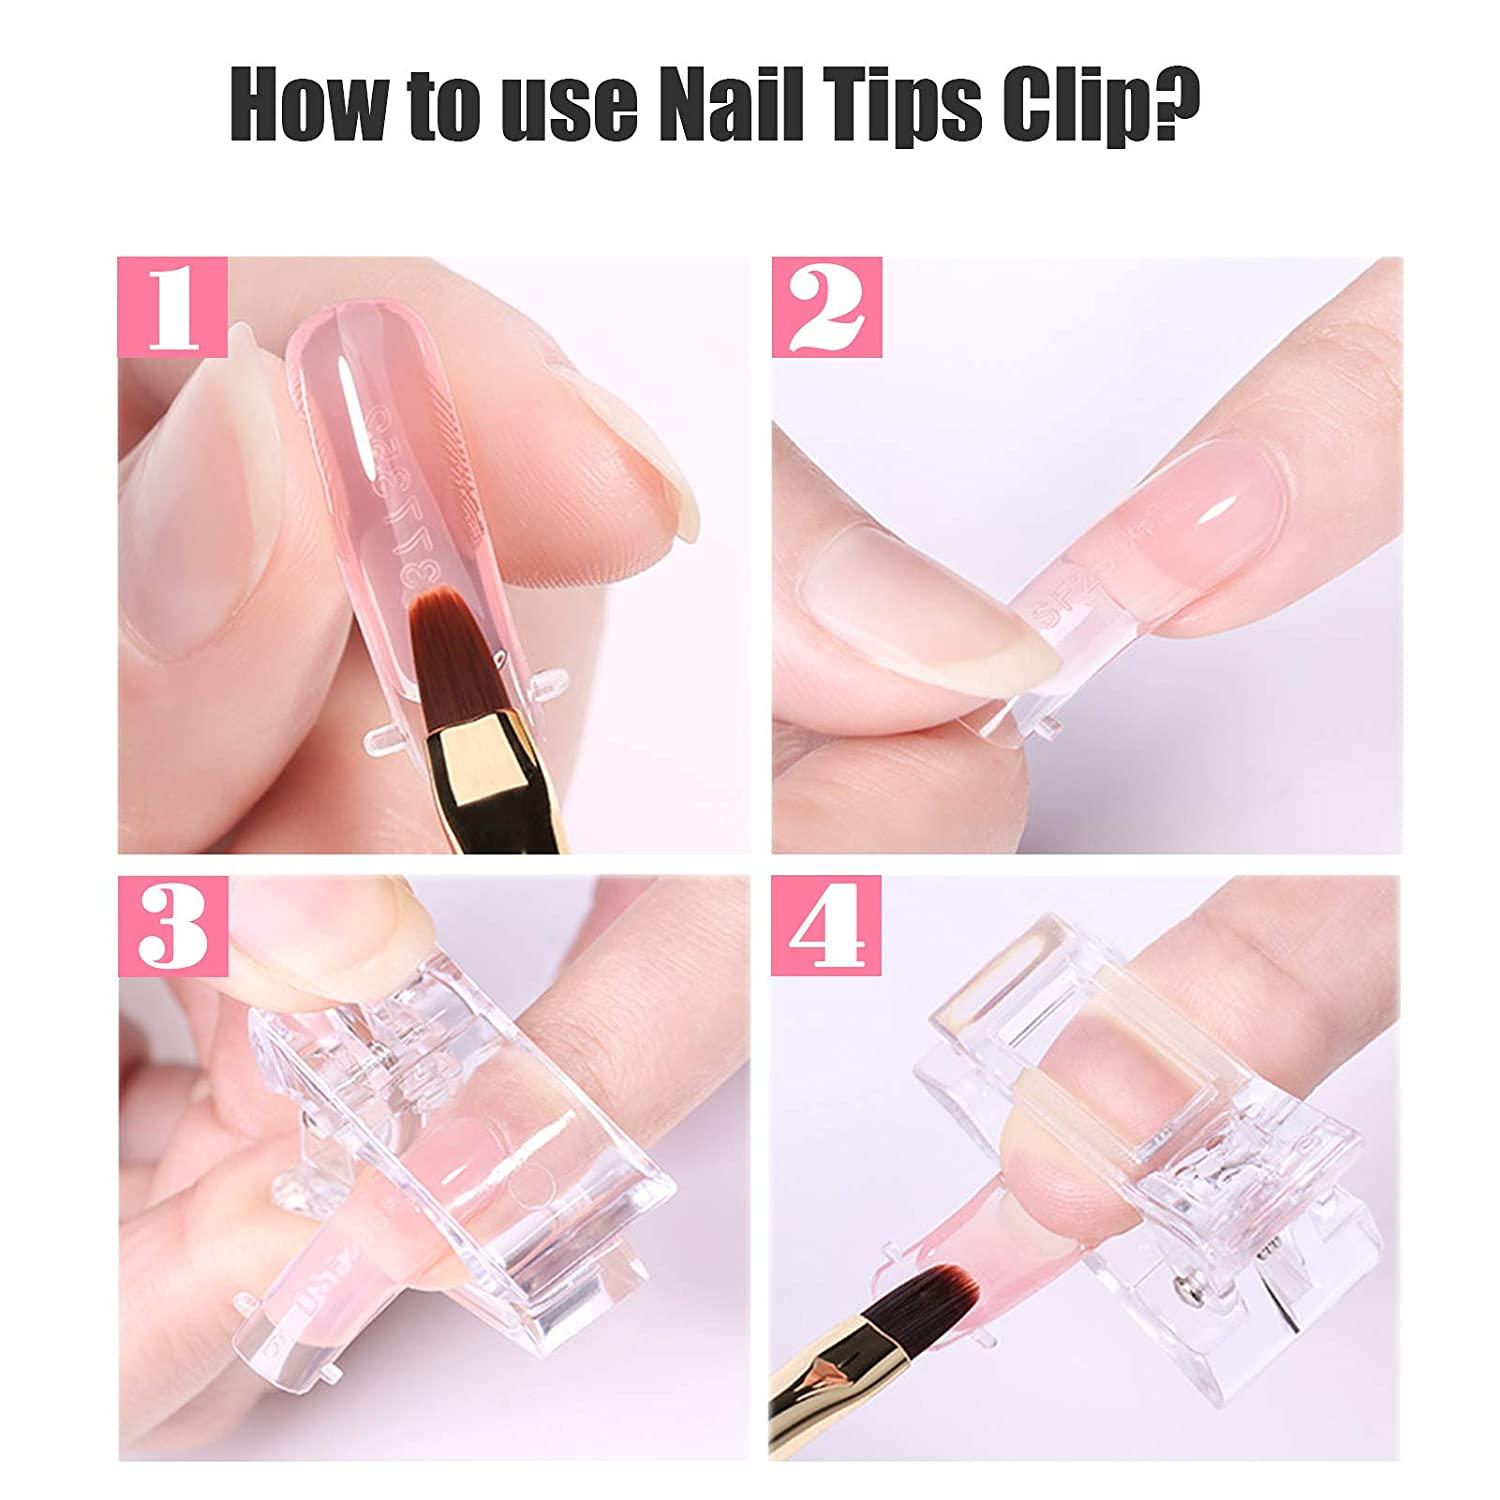 Nail Clips for Polygel 10PCS Clear Nail Tips Clip for Quick Building Nail  Forms Clamps Nail Extension DIY Manicure Nail Art Tool